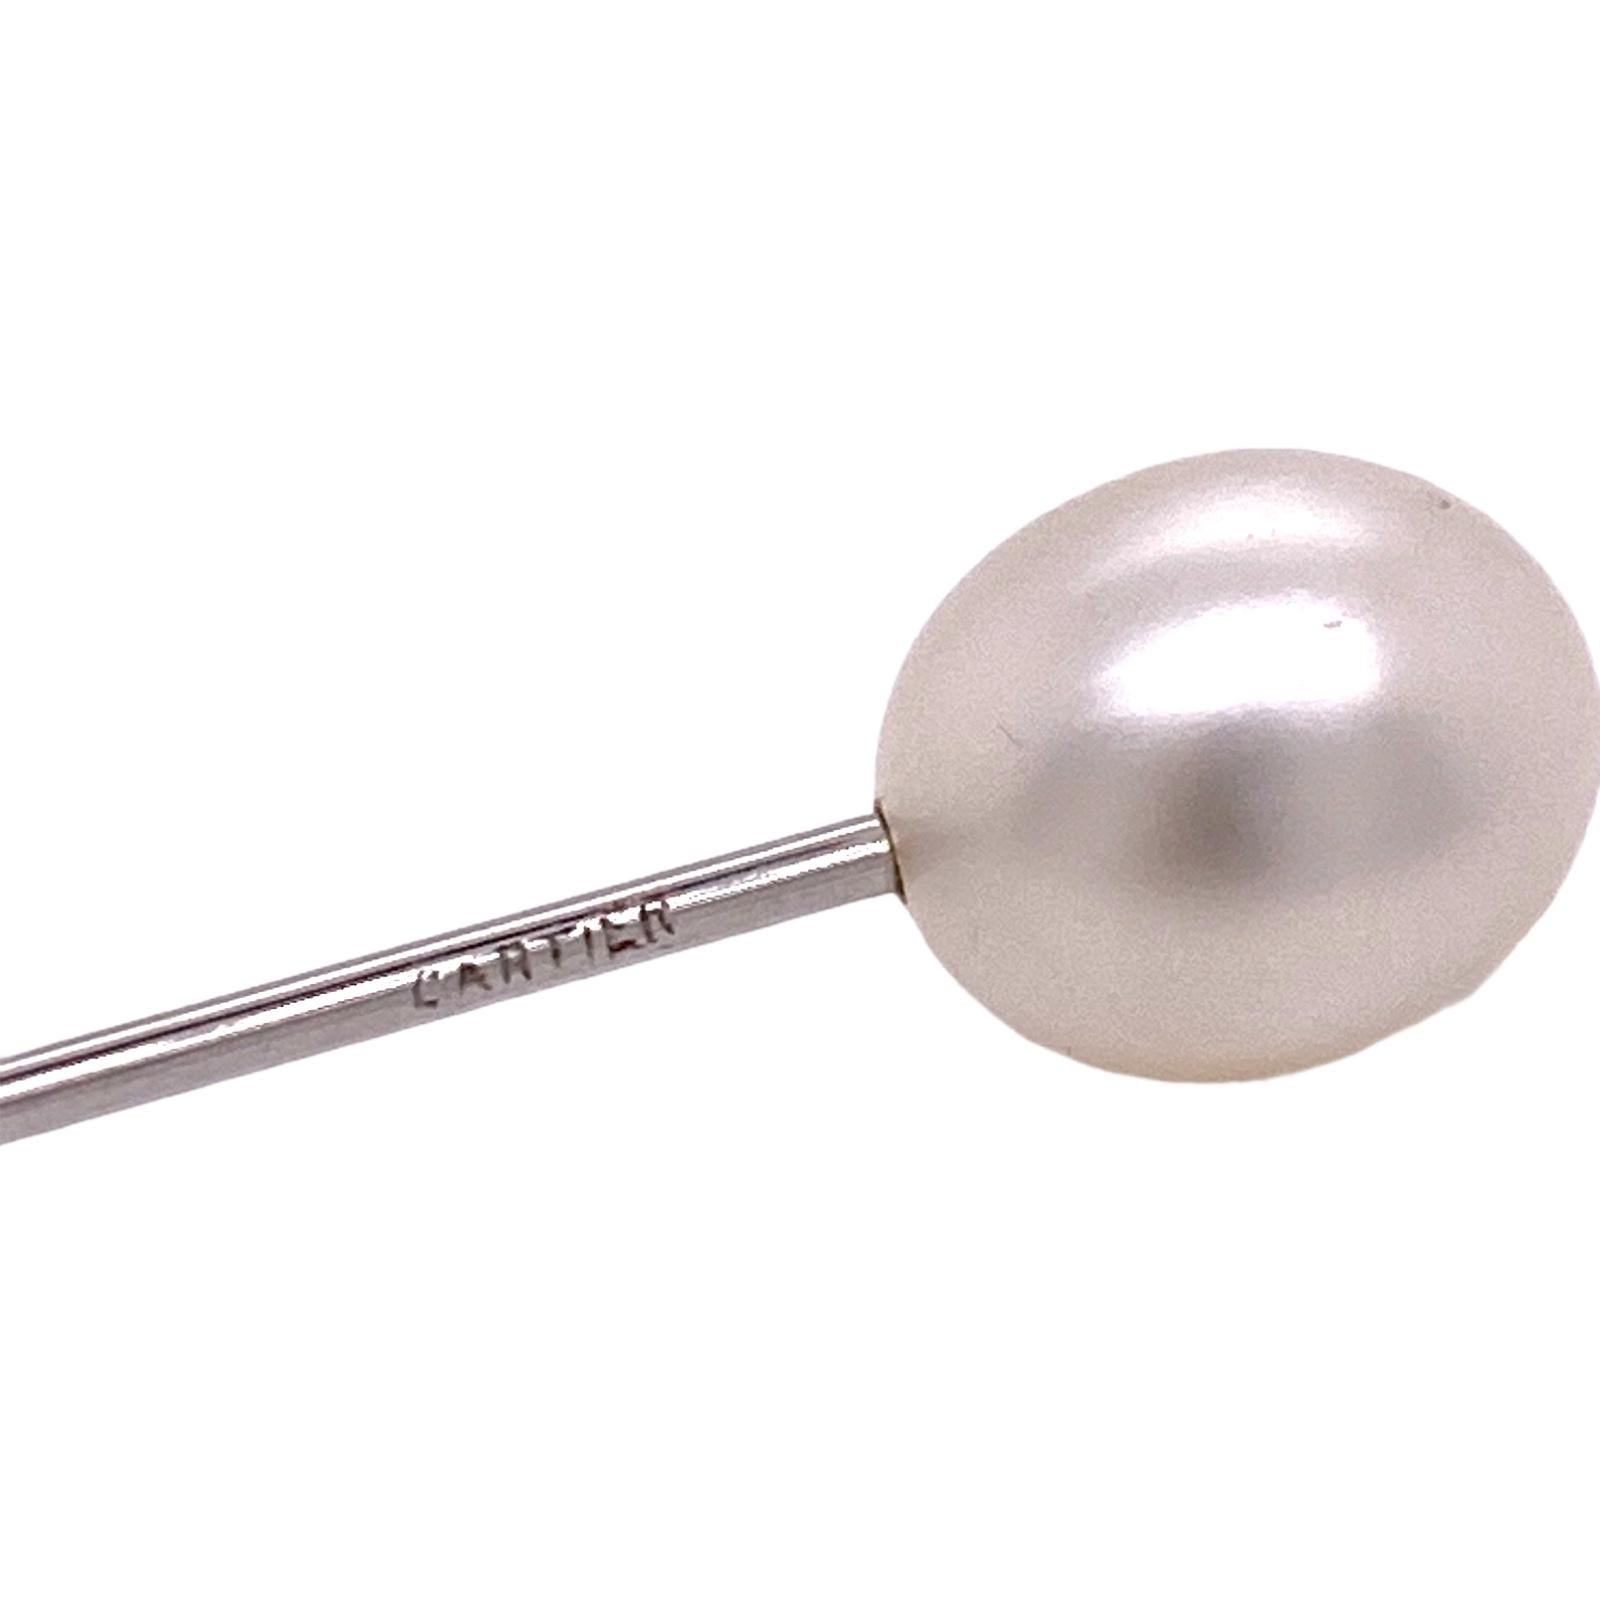 Rare vintage natural pearl stick pin by Cartier. The oval white natural pearl measures 10.7 x 9.0 mm and is certified by the GIA. The platinum stick pin measures 3.0 inches in length and is signed Cartier. 